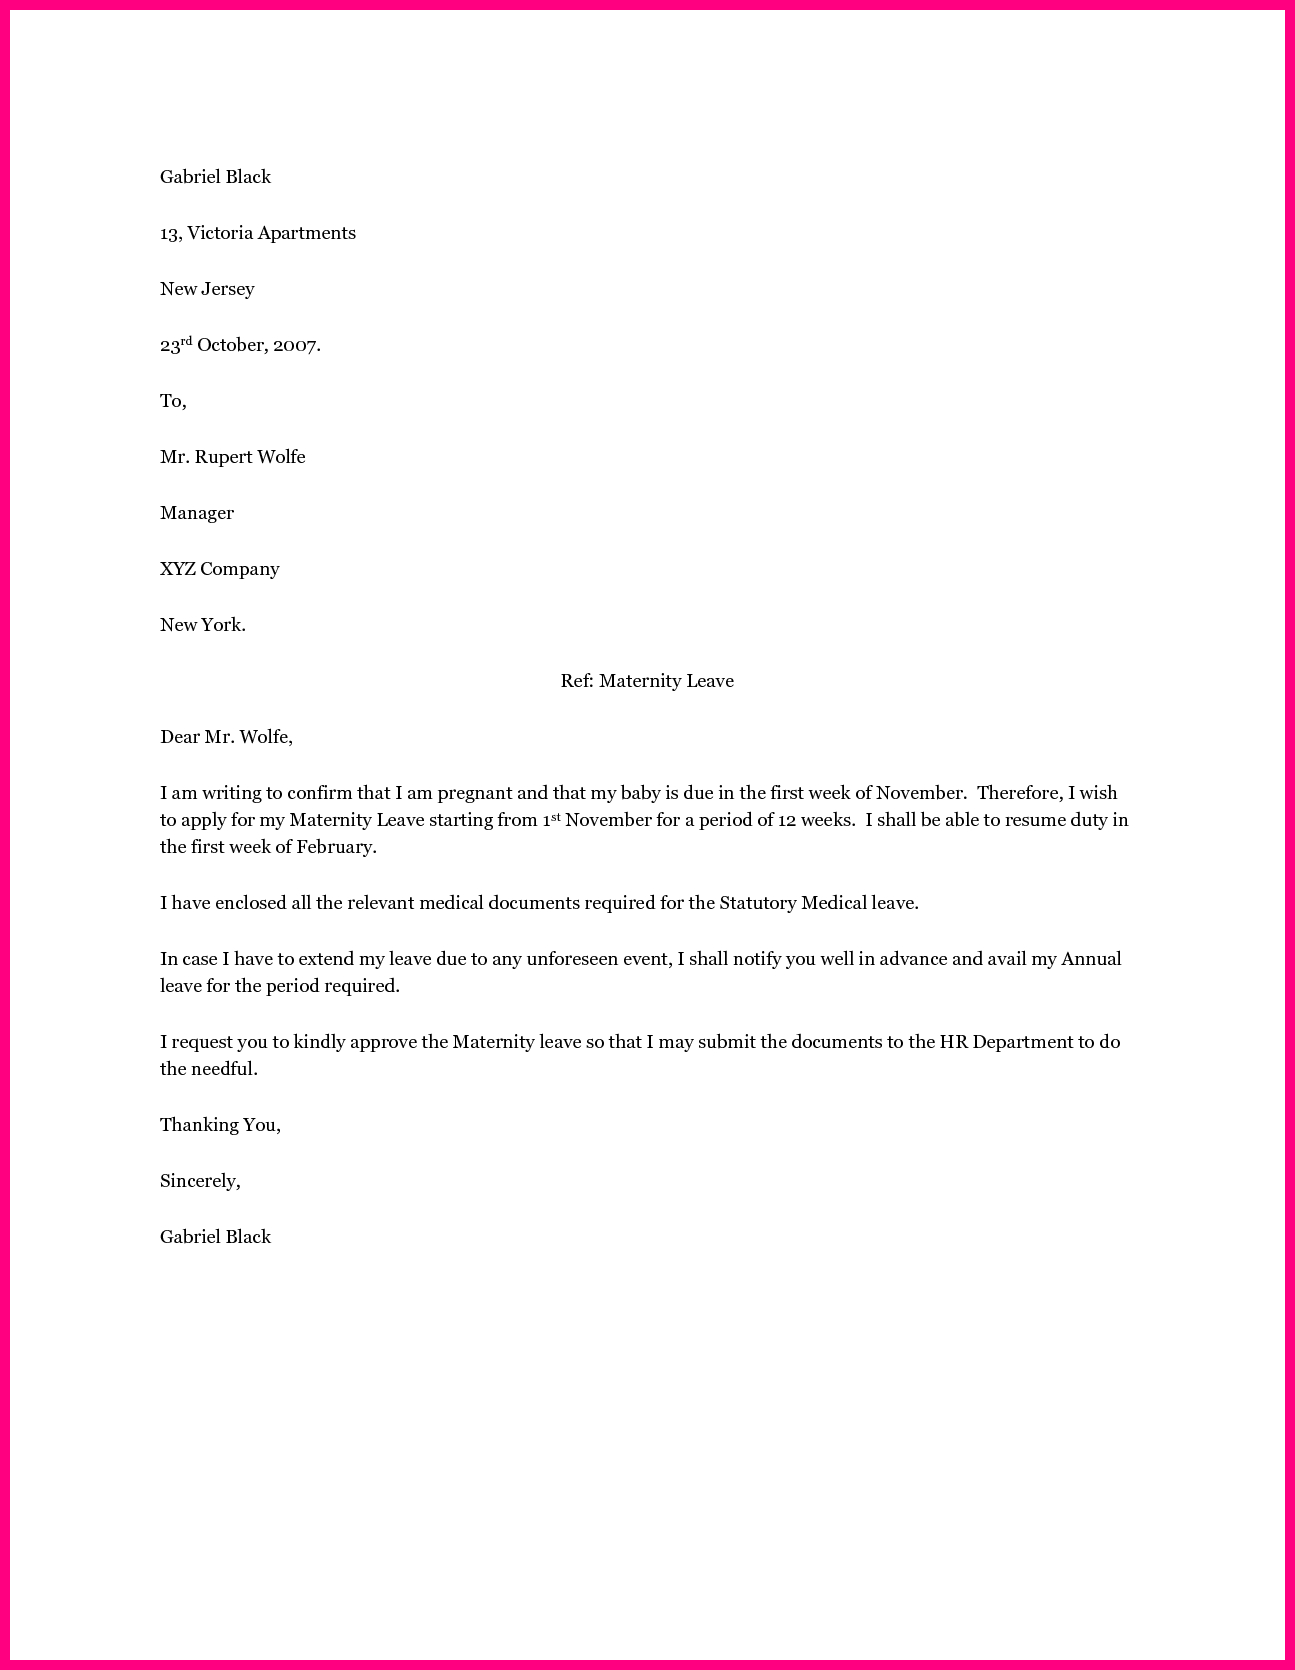 Pregnancy Confirmation Letter Template - Employee Maternity Leave Letter Sample Application format for School